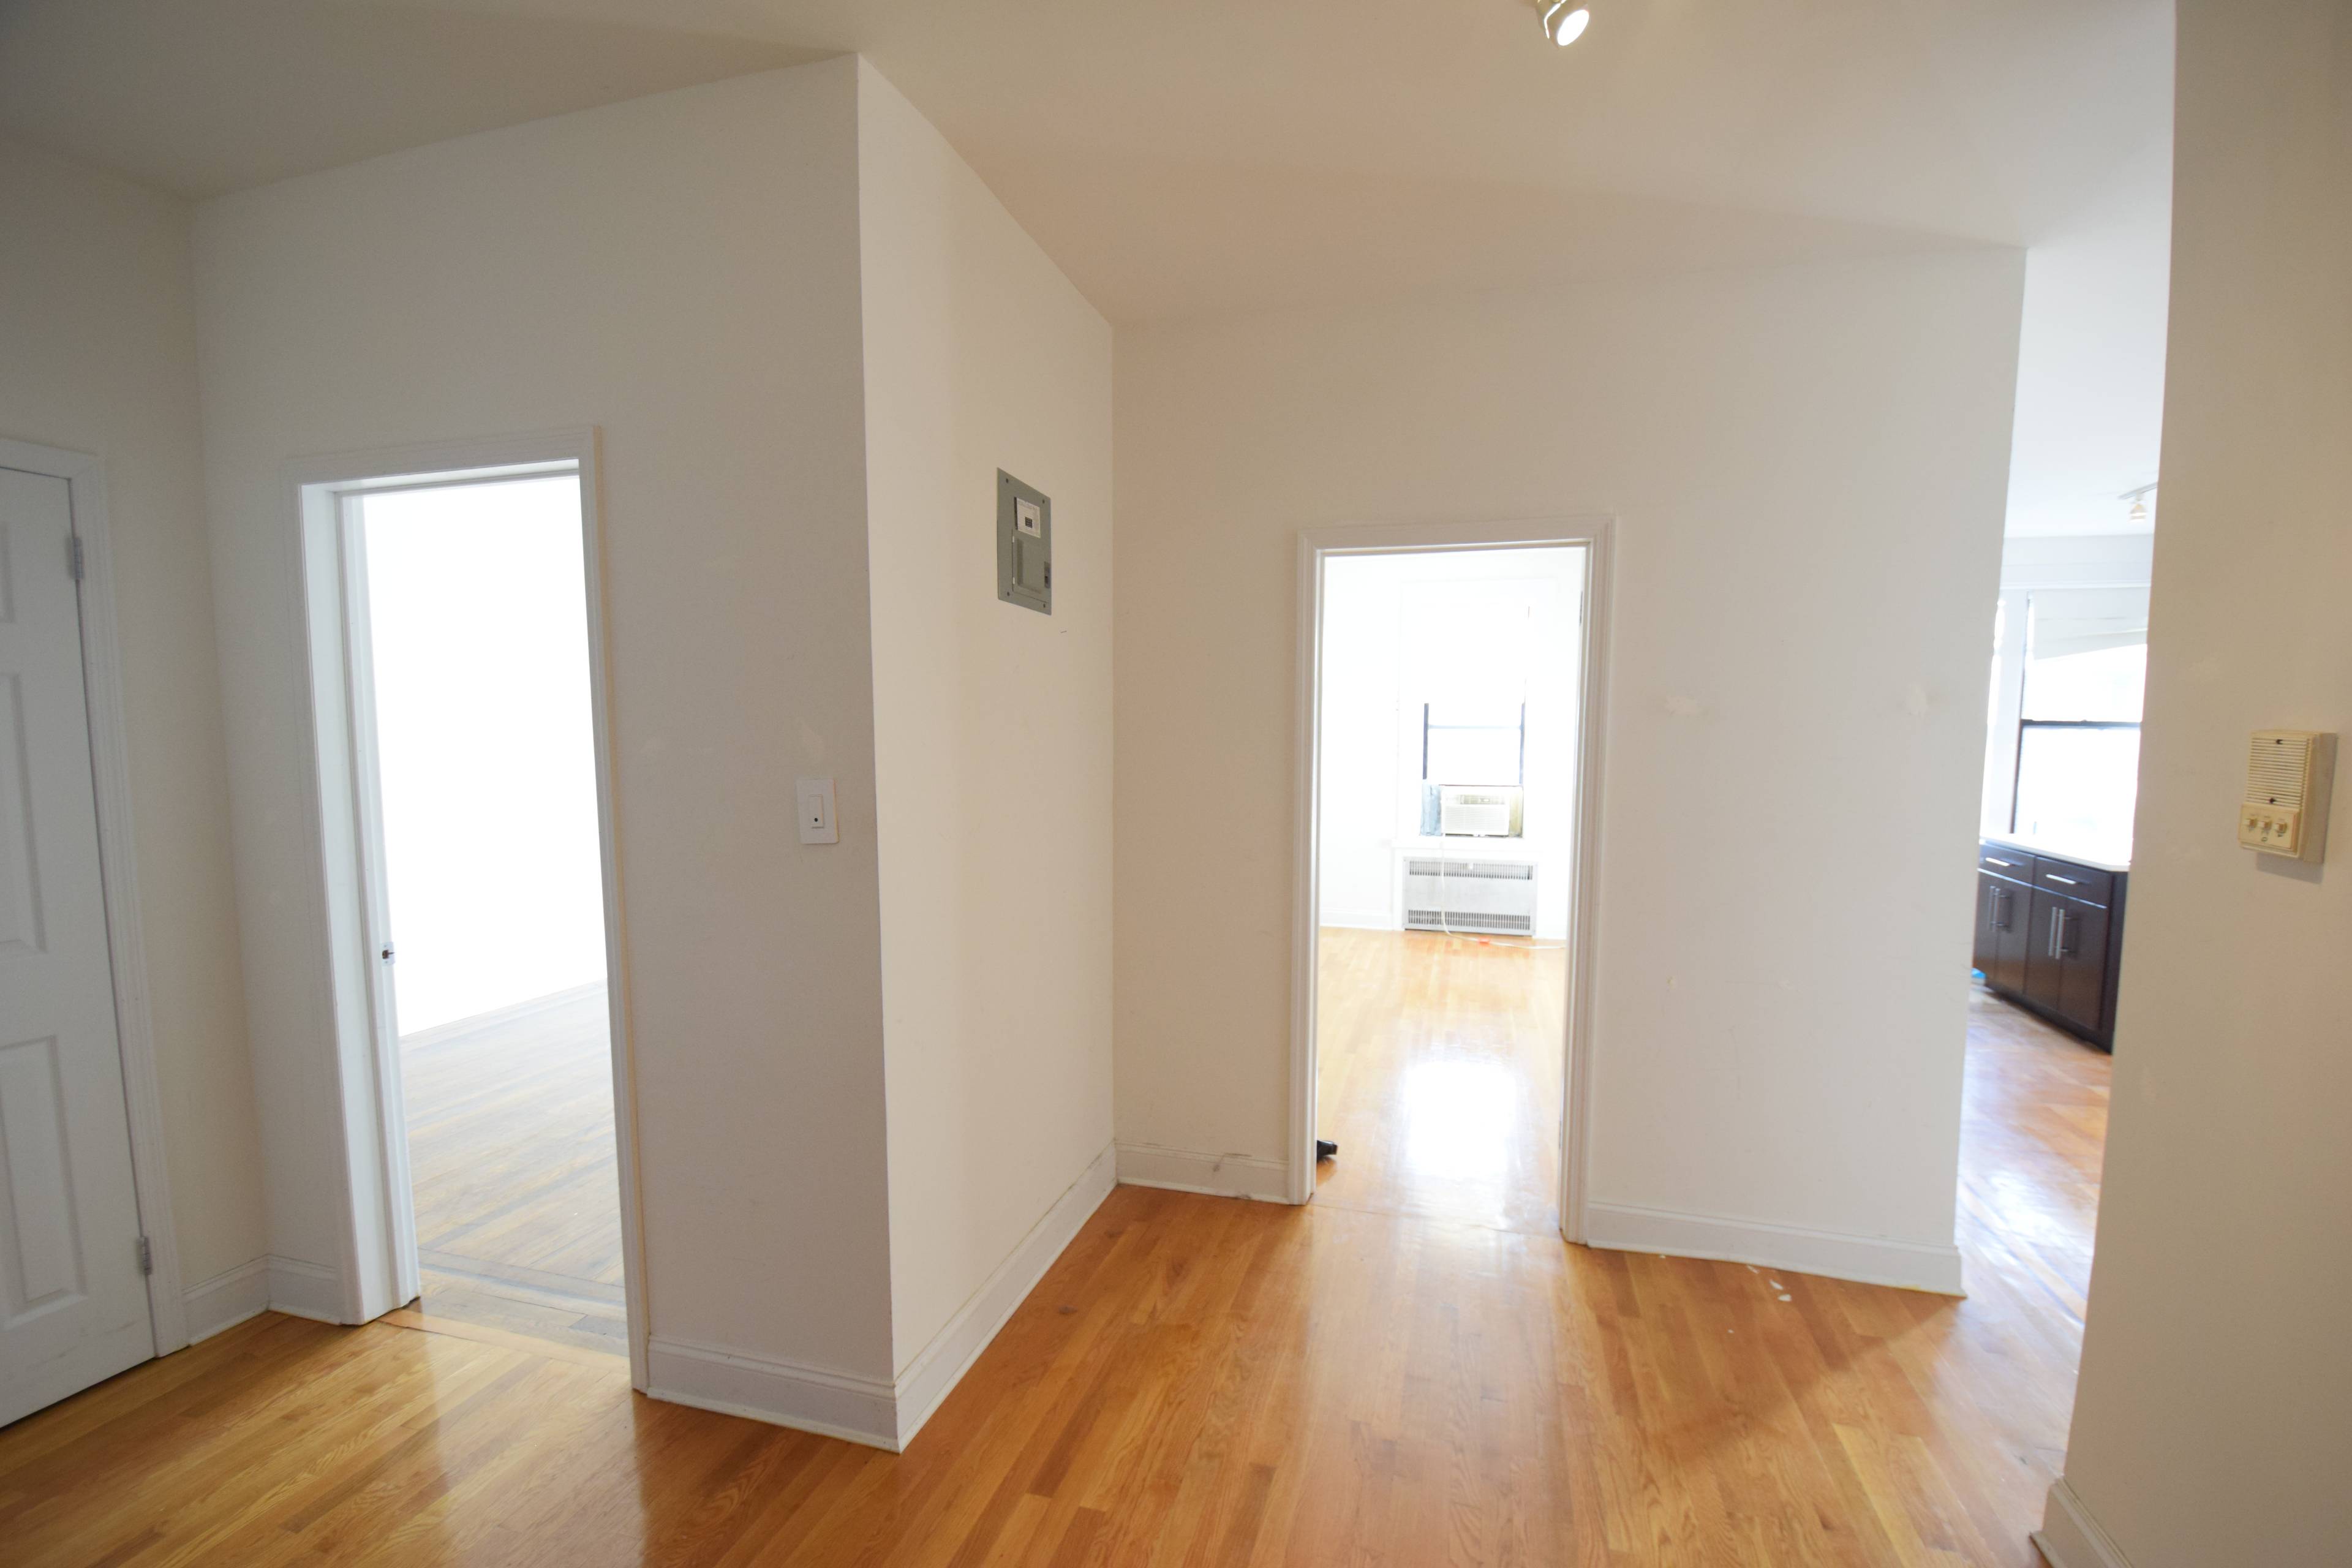 This apartment is located on the 6th floor of a building with an elevator and a live in super.